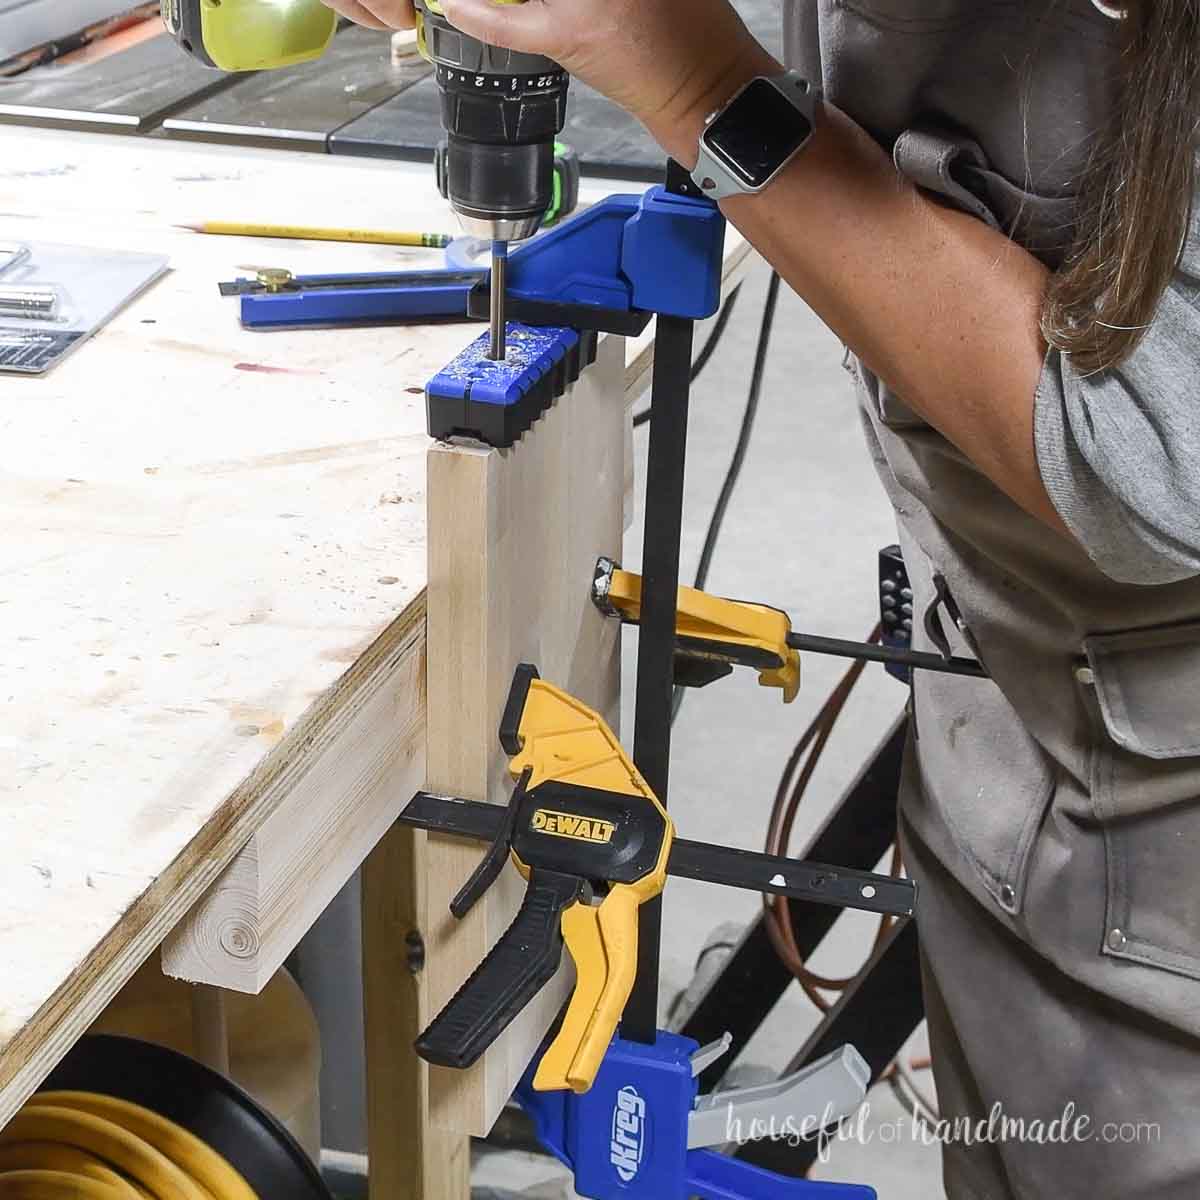 Drilling a hole with a long drill bit.